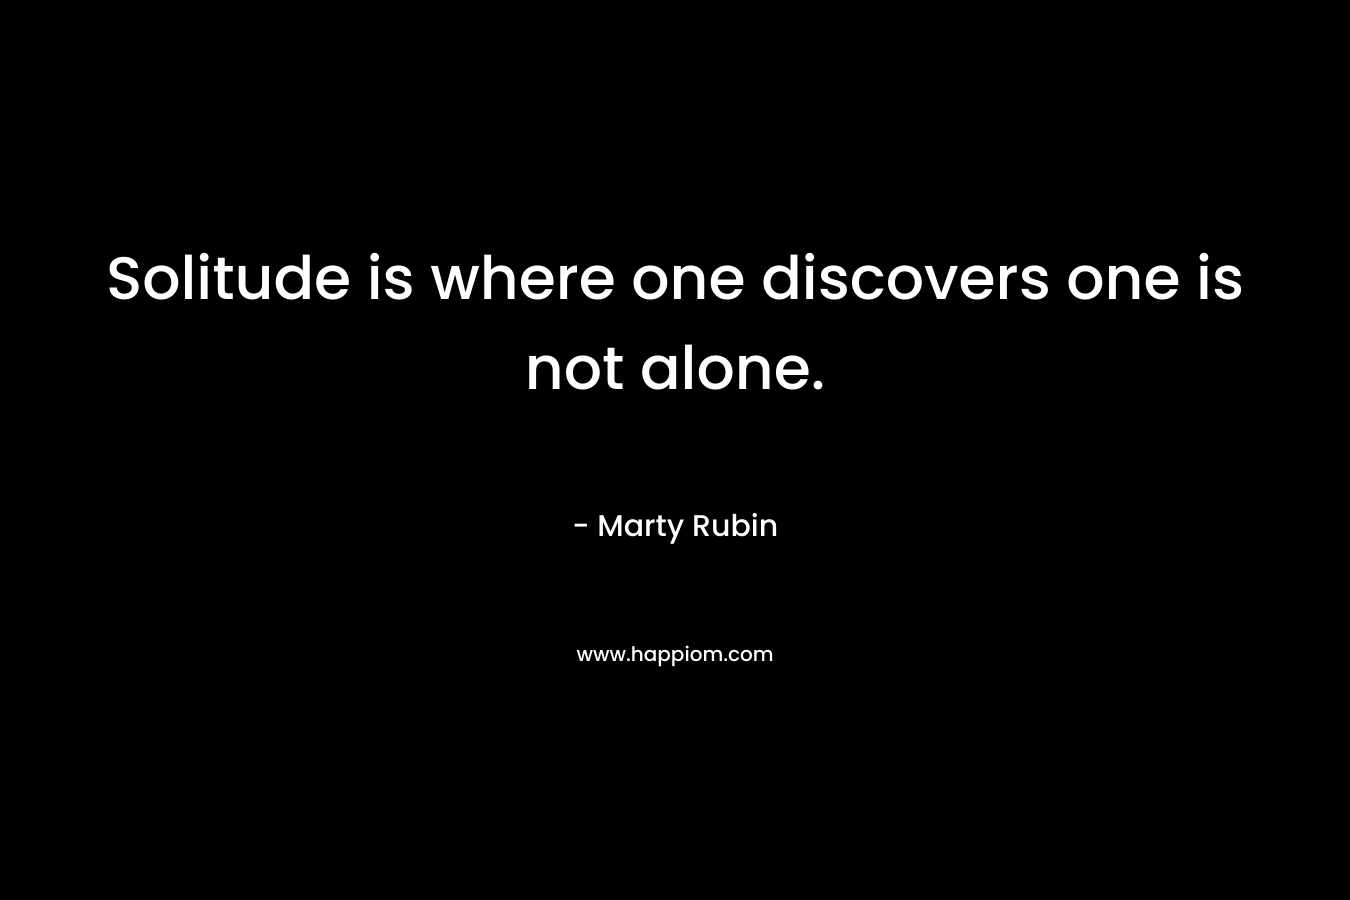 Solitude is where one discovers one is not alone.